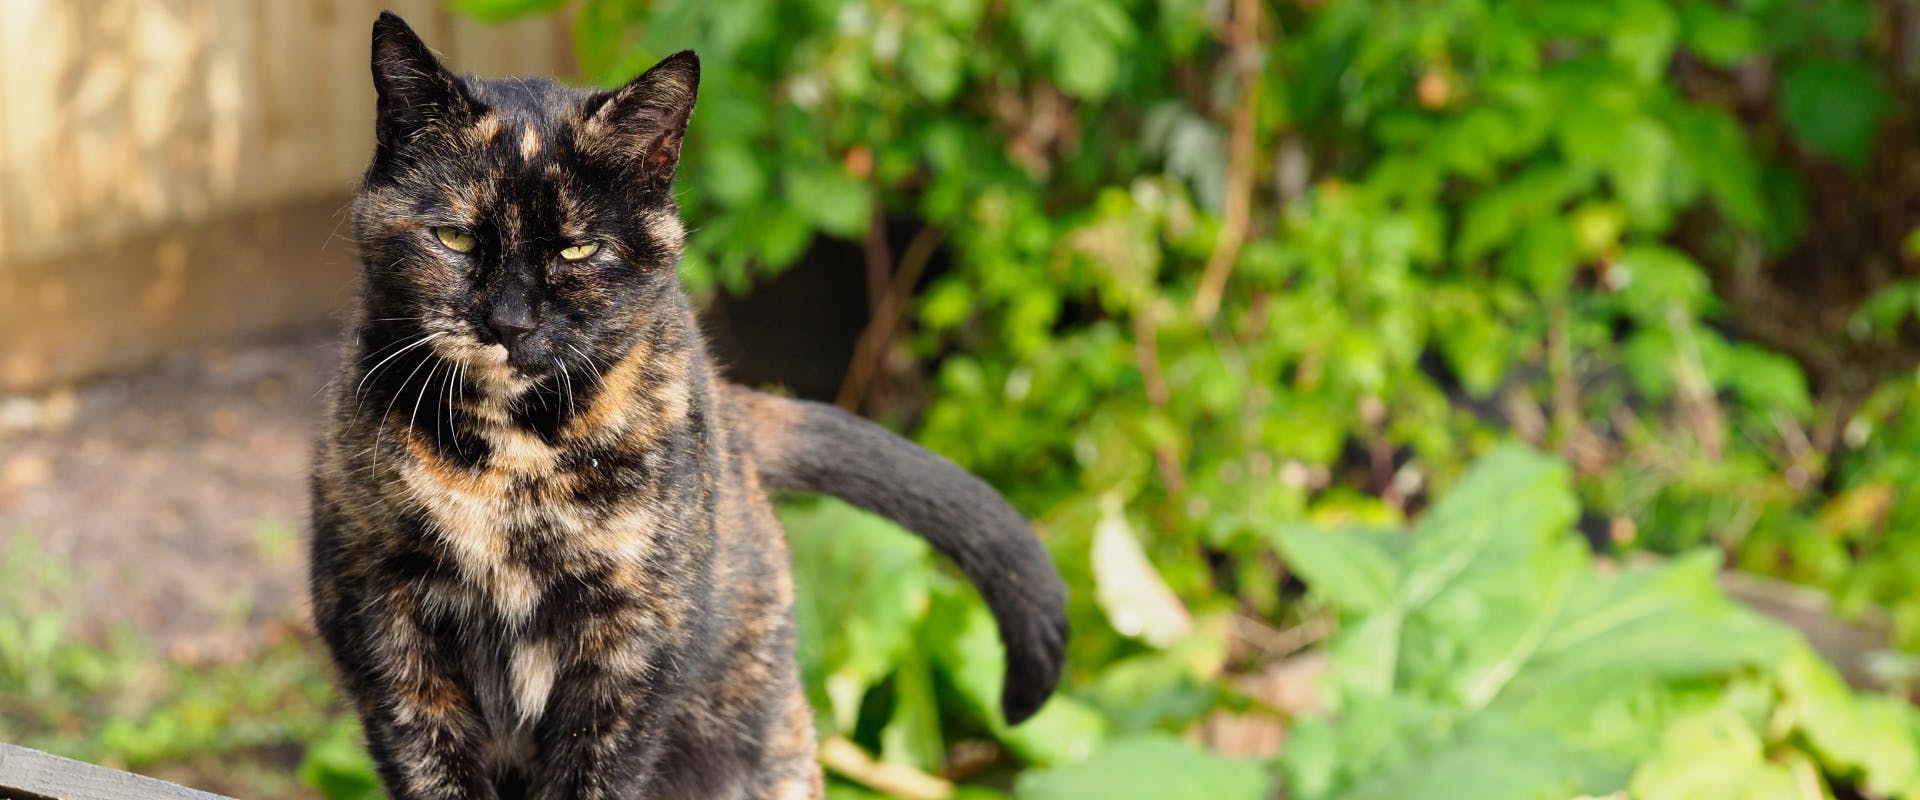 a tortoiseshell cat walking through a vegetable patch while looking directly at the camera